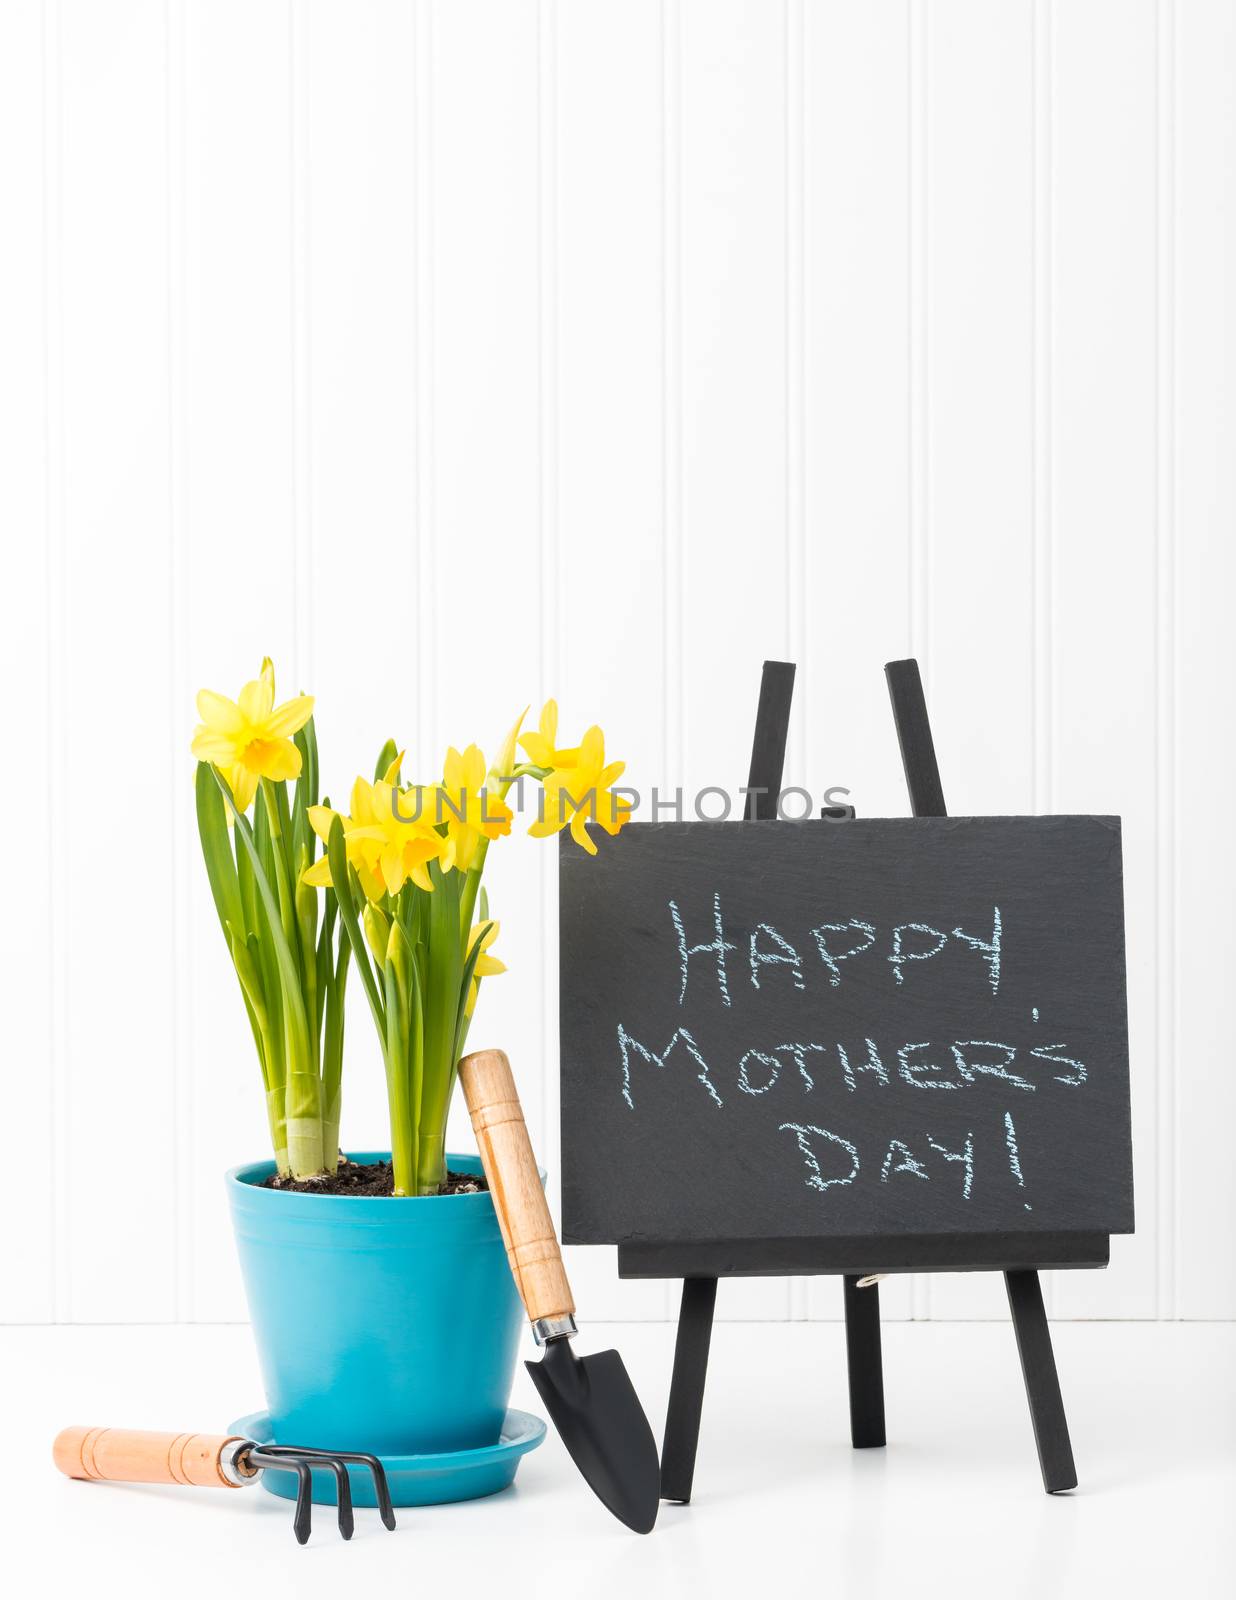 Mothers Day Message Portrait by billberryphotography